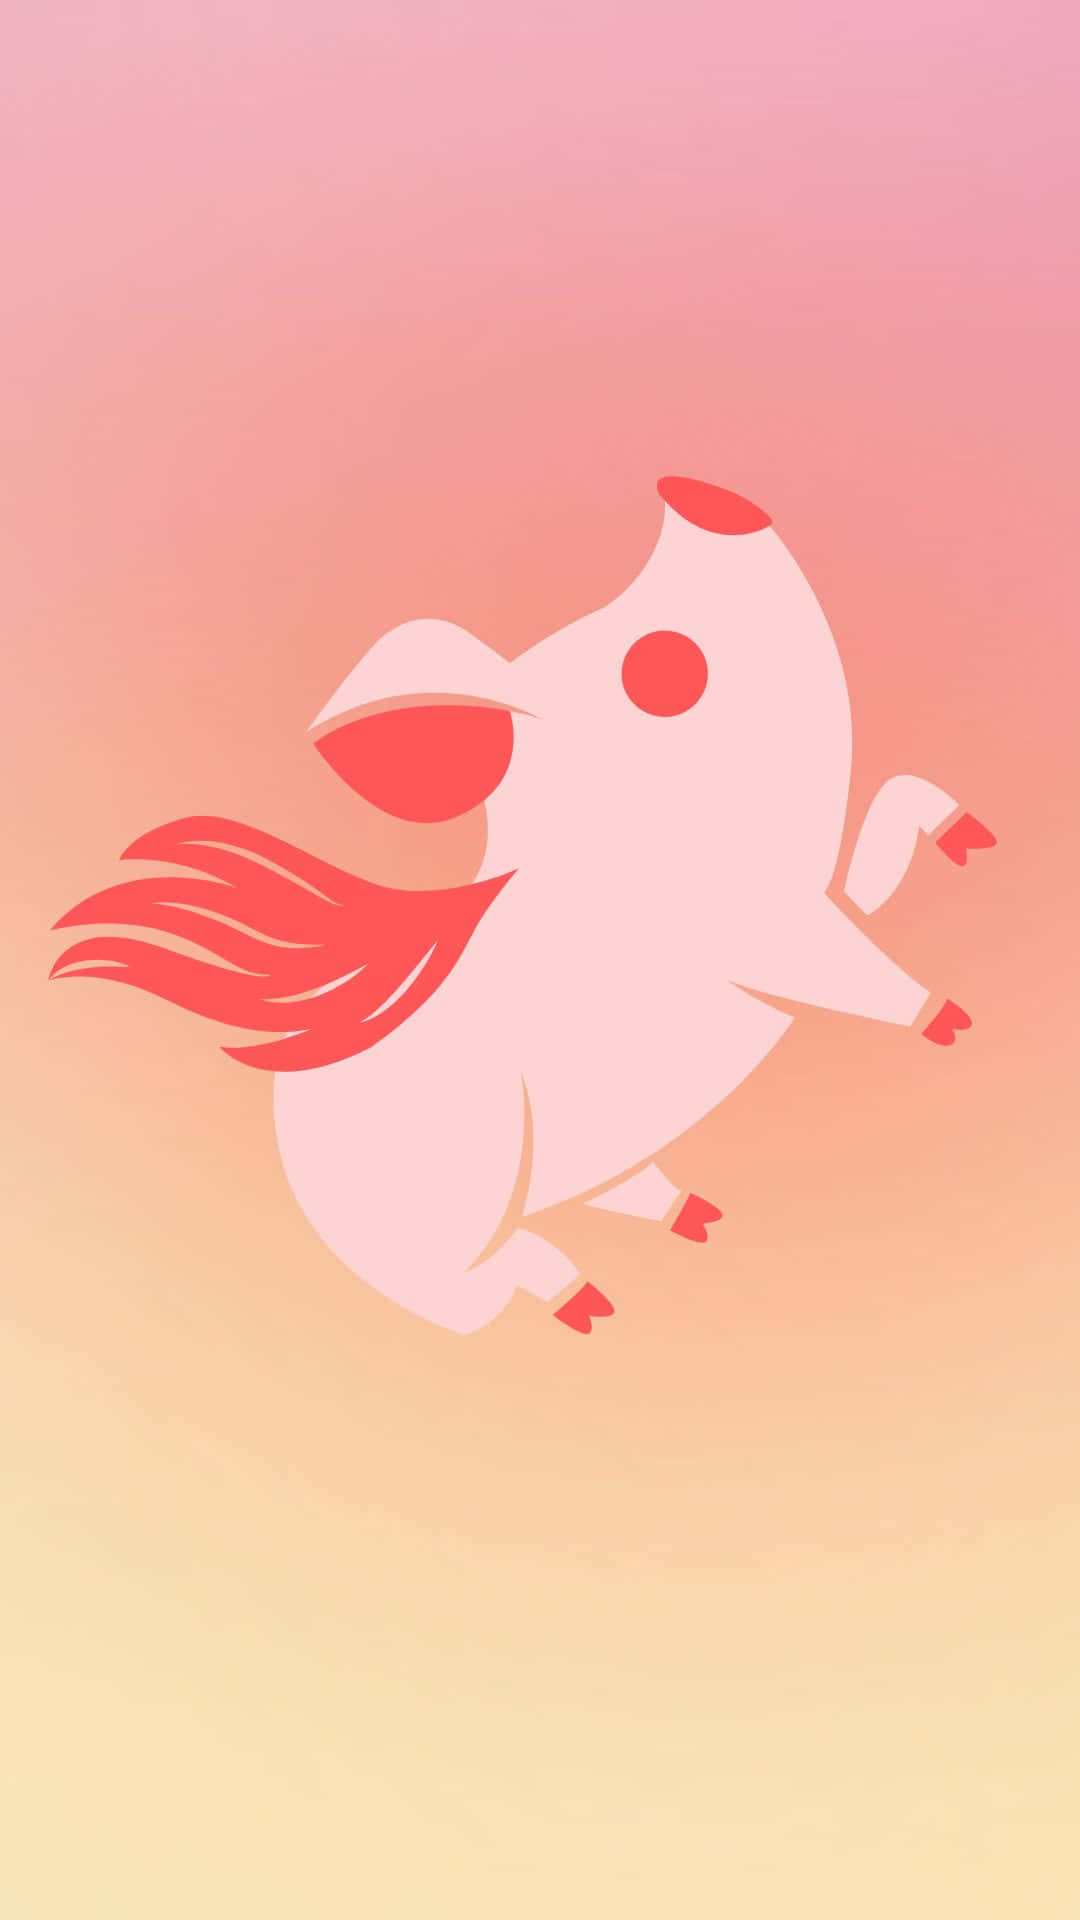 A Pink Pig Flying In The Sky Wallpaper